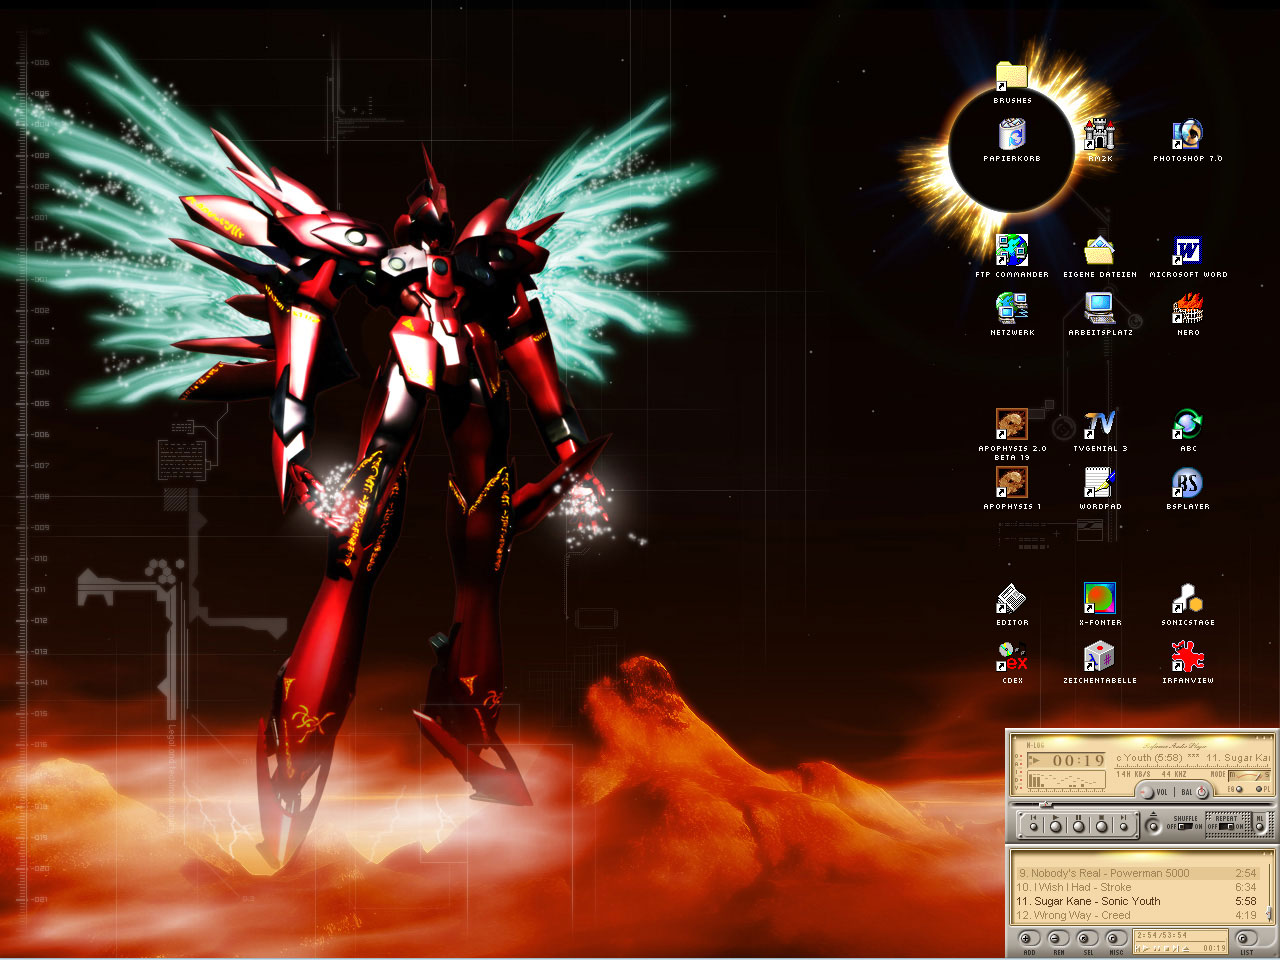 Windows Sundel This Is A Xenogears Wallpaper I Just Made